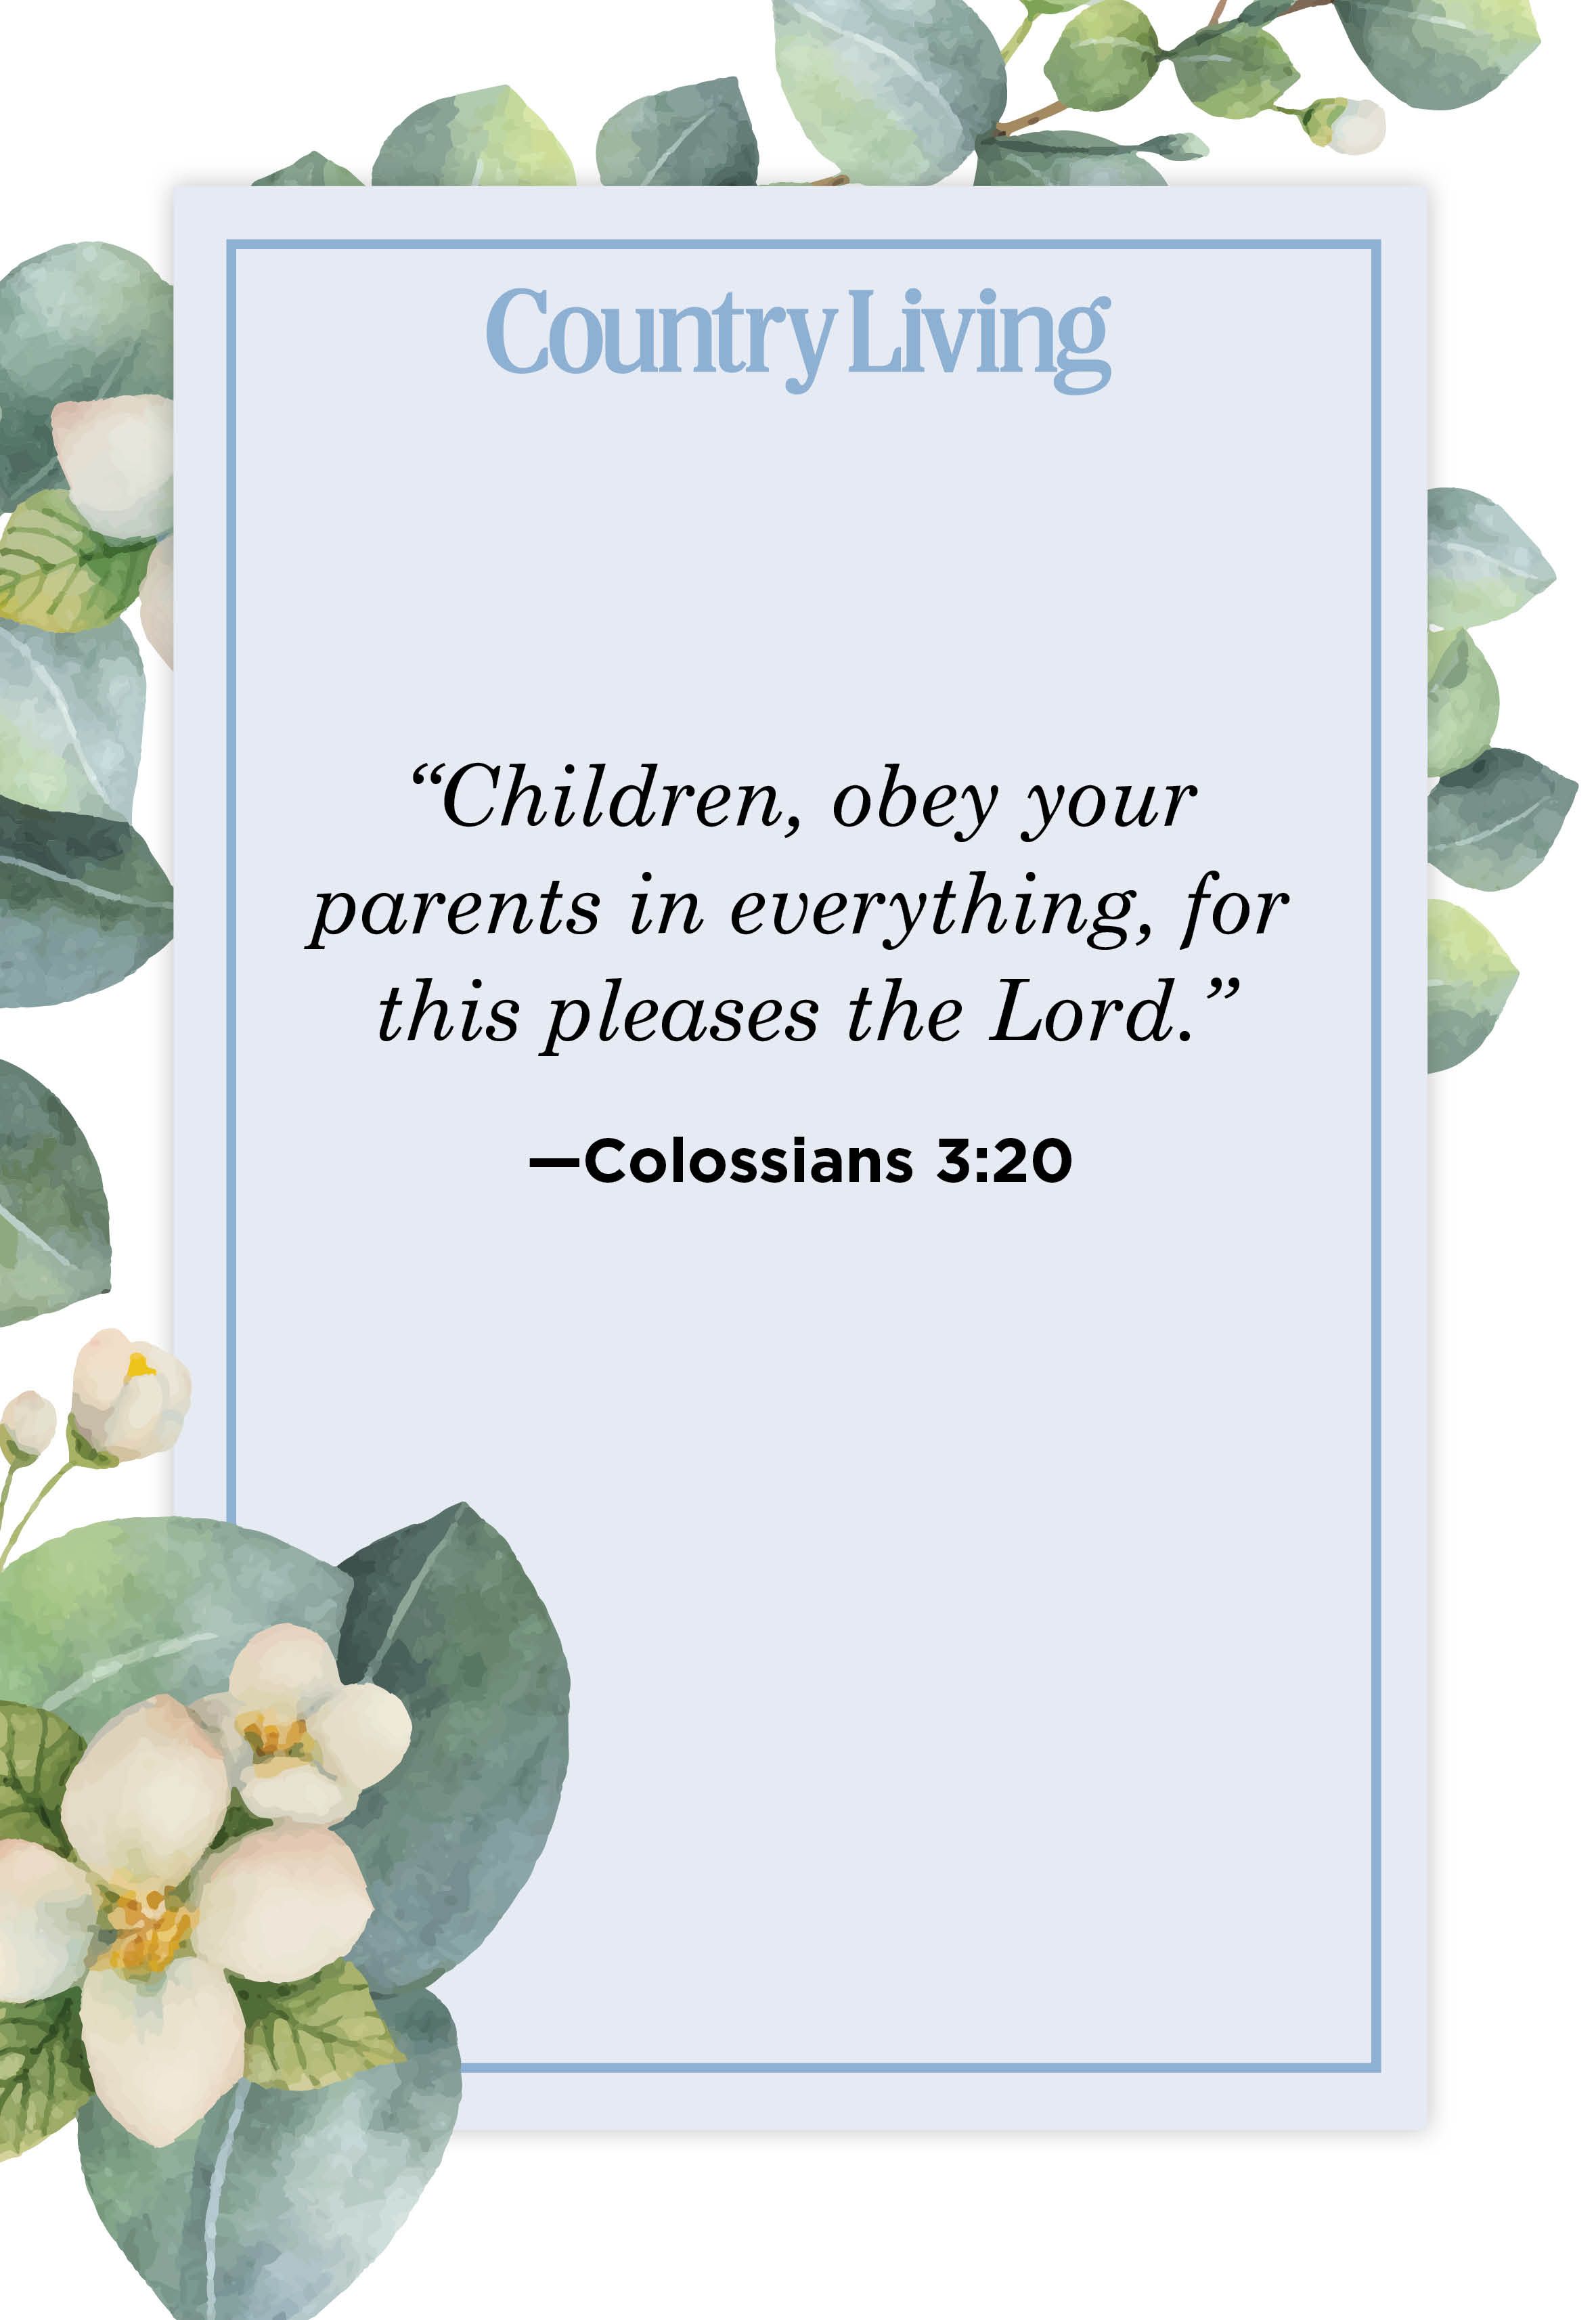 Bible Verses for Miscarriage - Focus on the Family